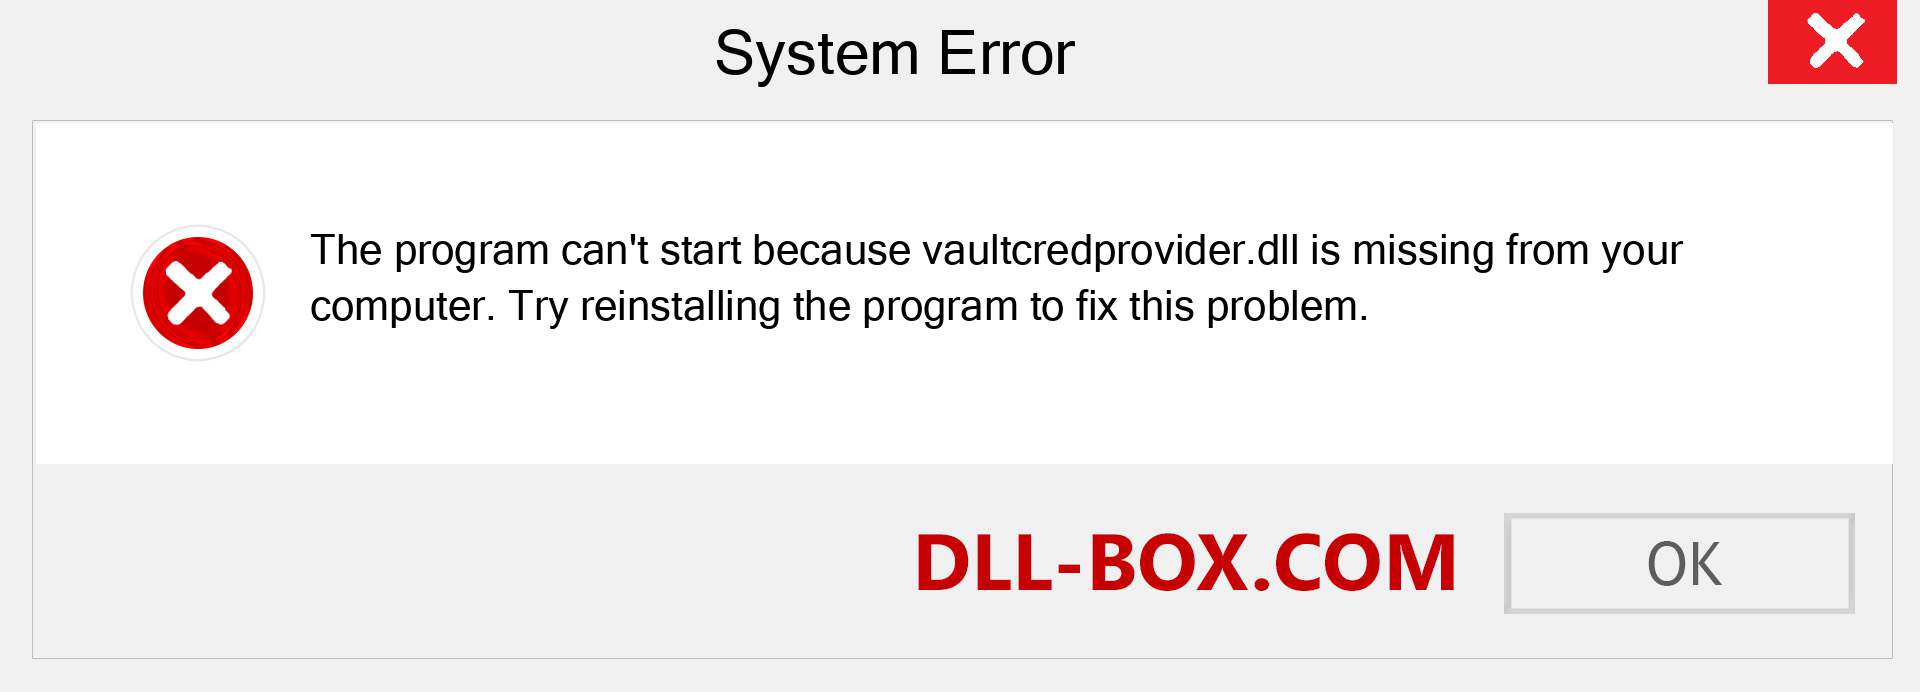  vaultcredprovider.dll file is missing?. Download for Windows 7, 8, 10 - Fix  vaultcredprovider dll Missing Error on Windows, photos, images